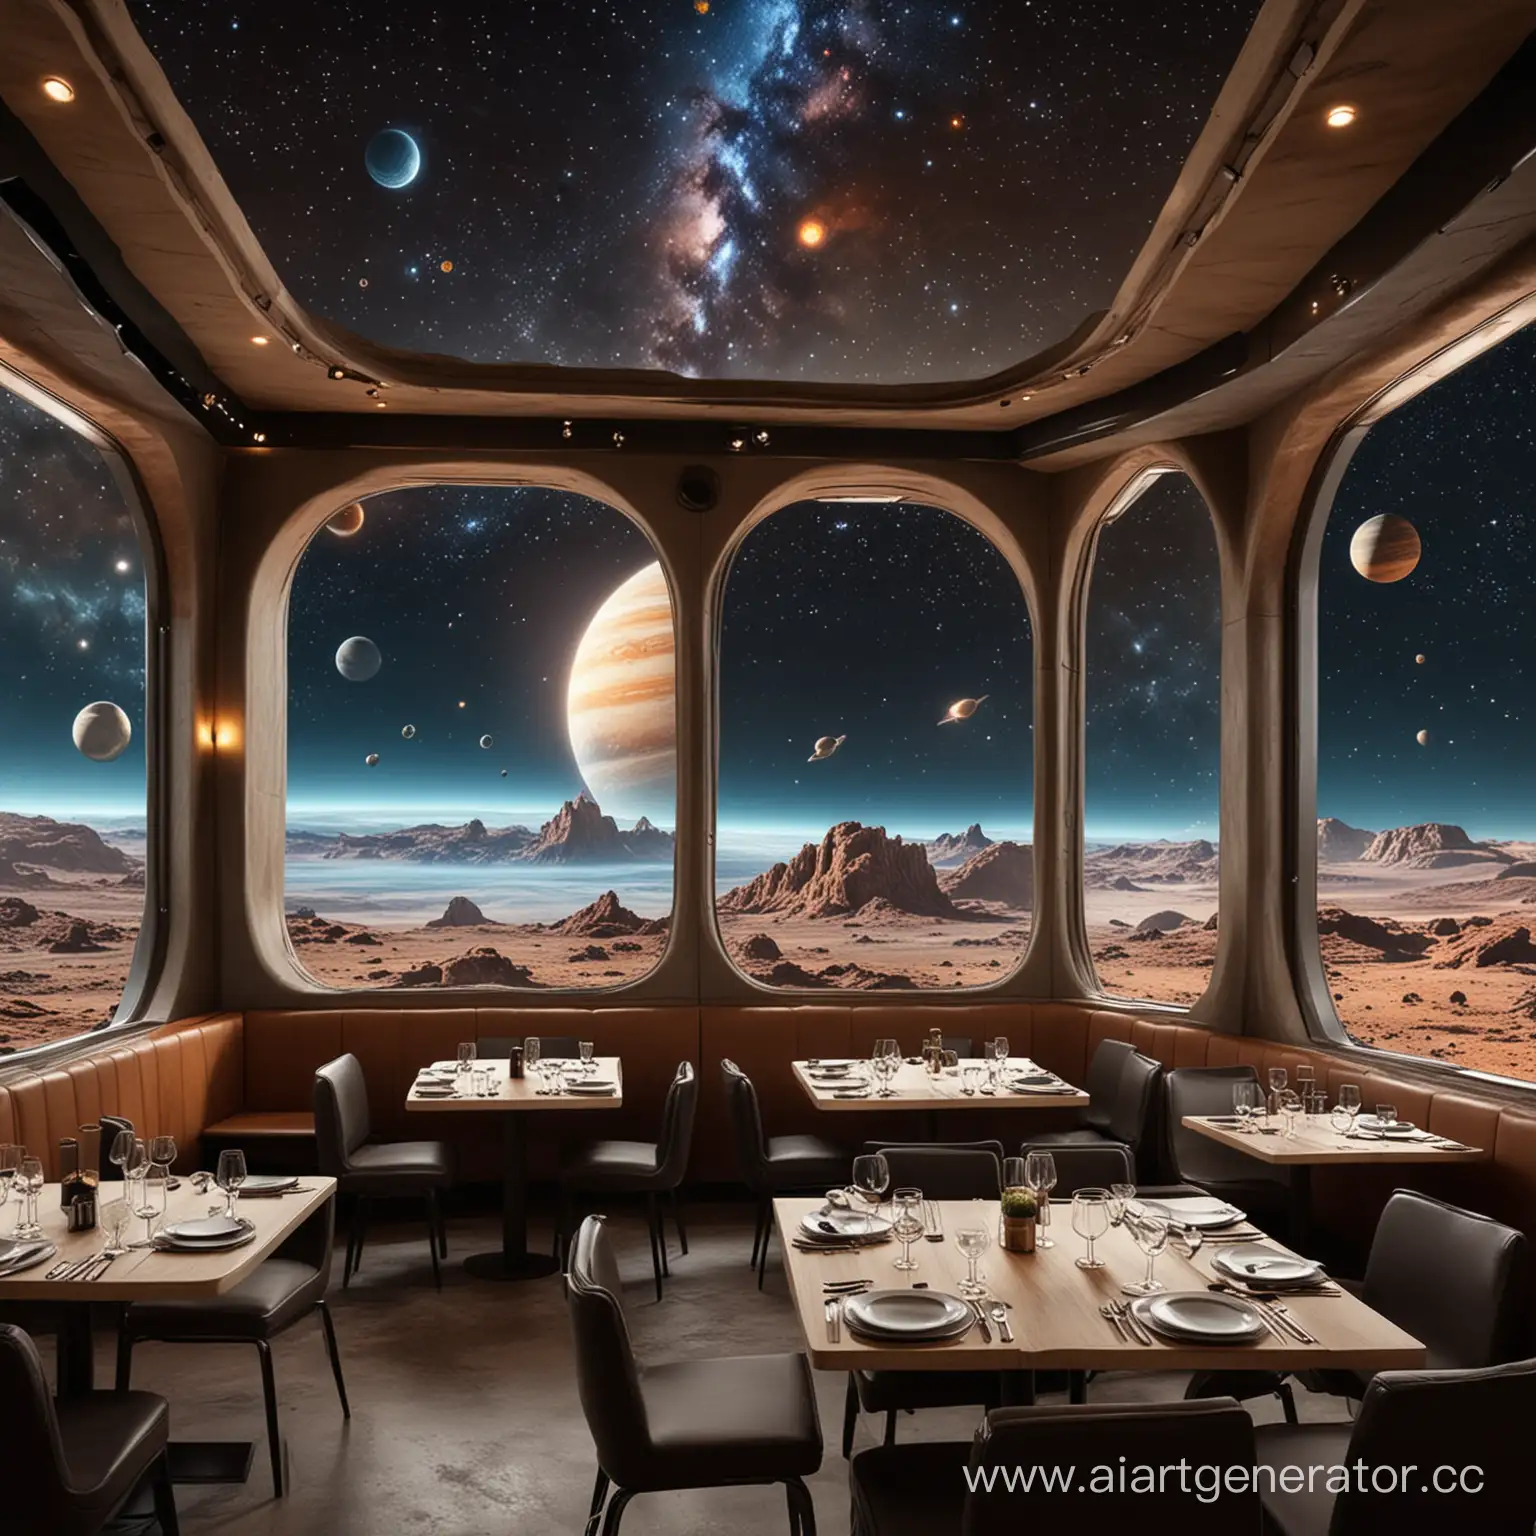 Futuristic-SpaceThemed-Restaurant-with-Realistic-Planet-Views